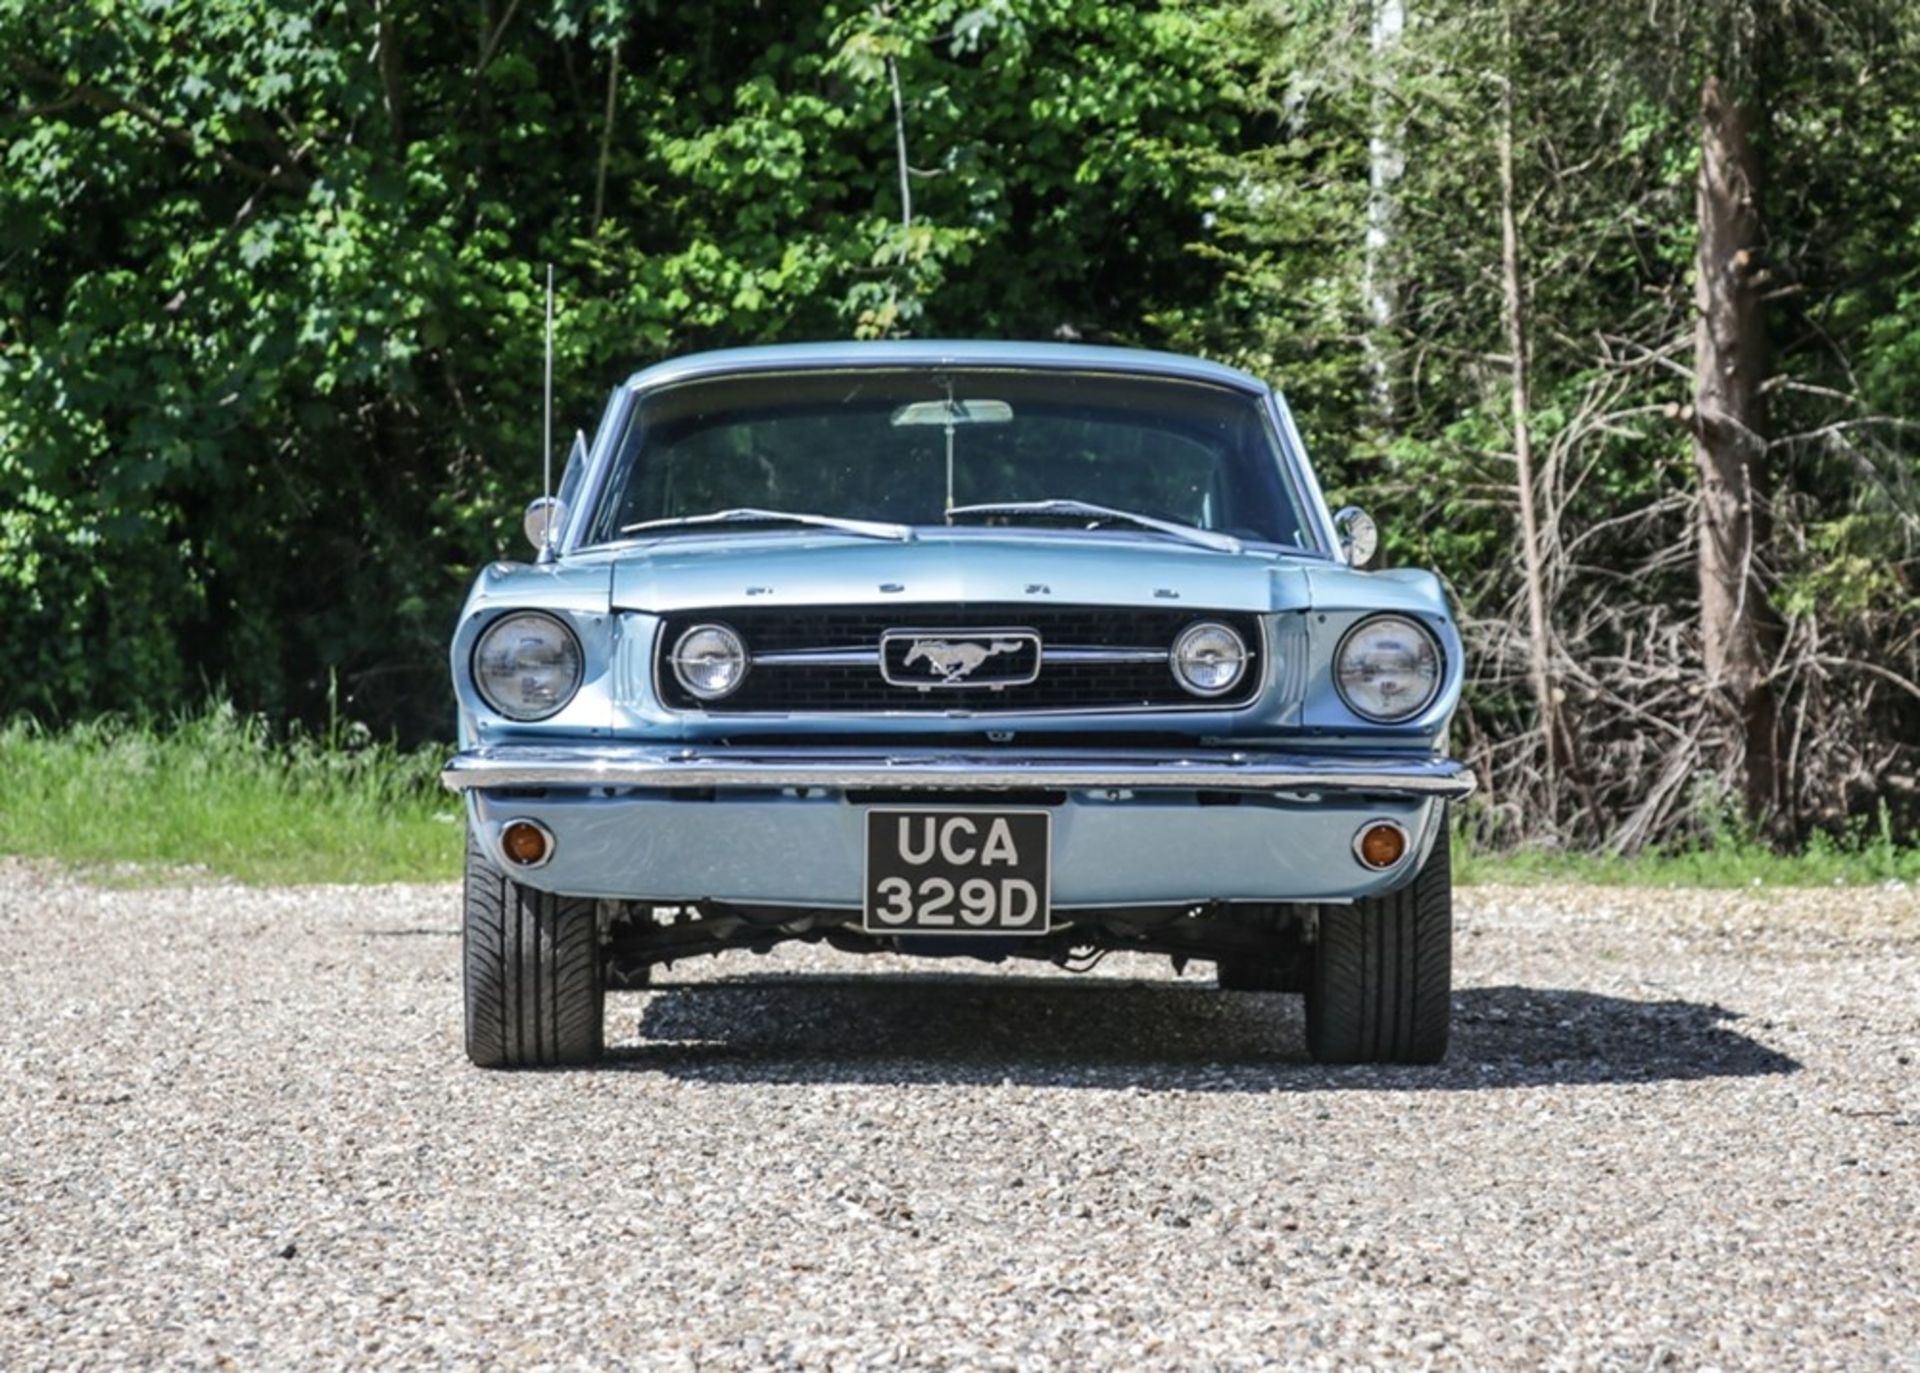 1966 Ford Mustang Fastback - Image 4 of 9